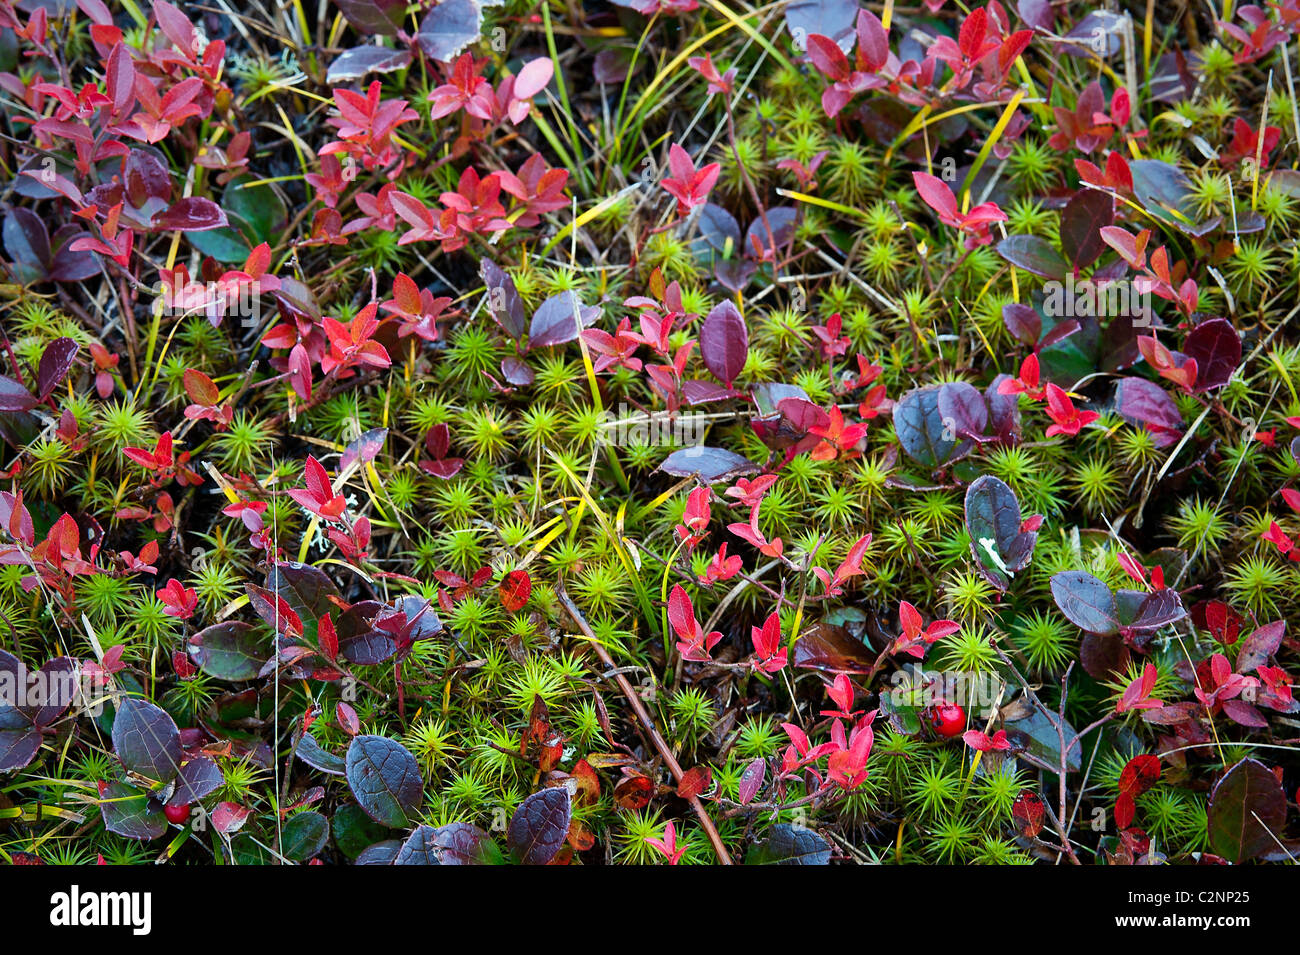 Colorful autumn groundcover plants. Stock Photo